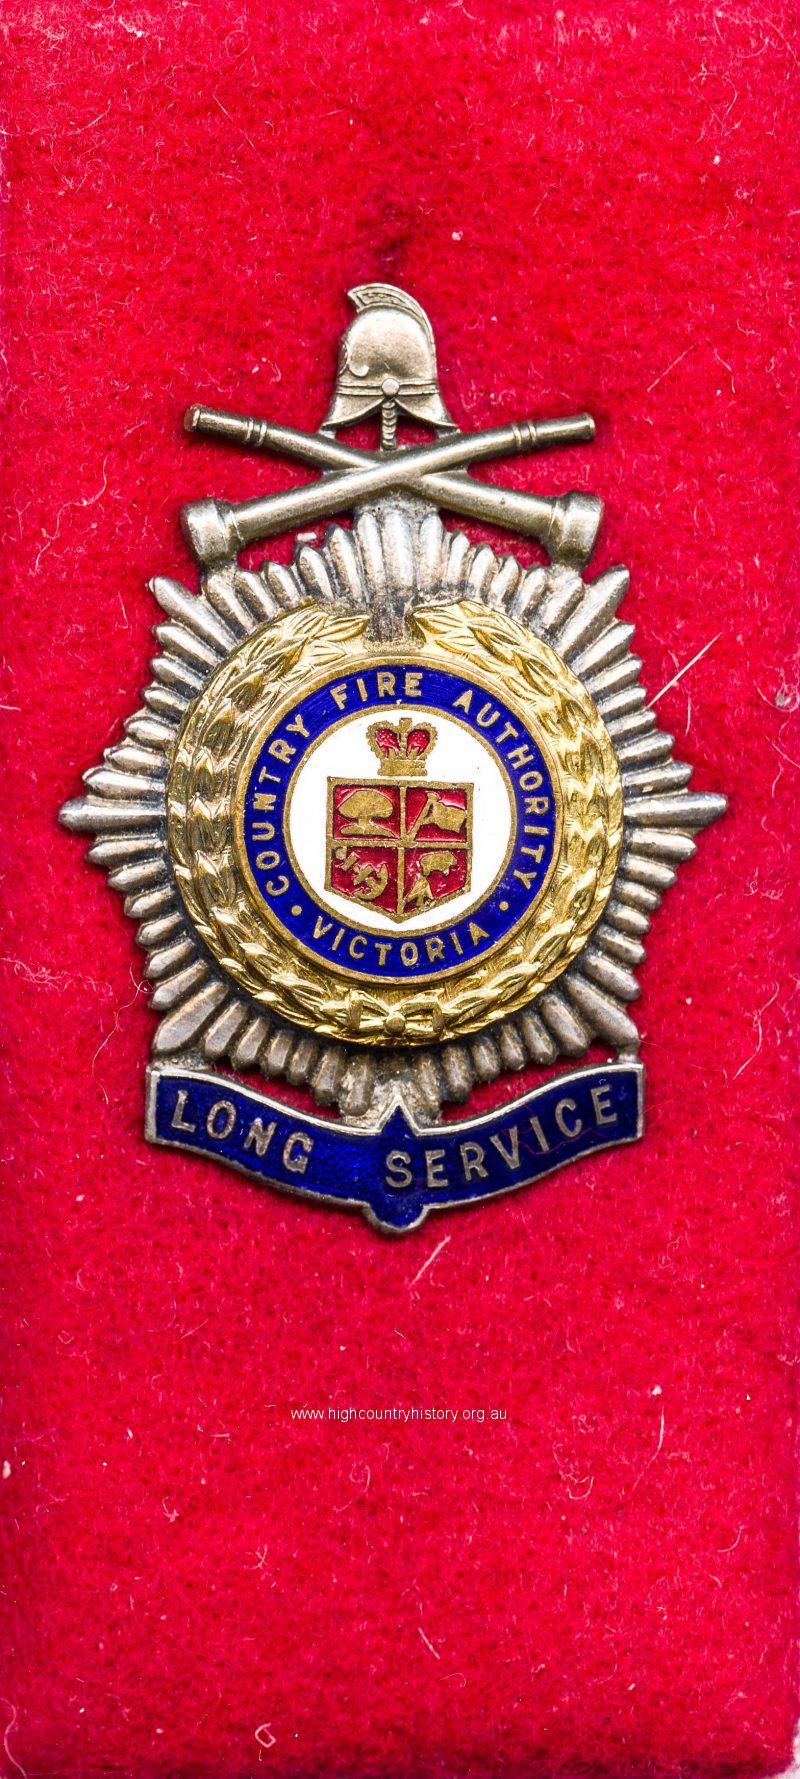 Country Fire Authority Victoria A 12 Year Long Service Badge Belonging To Neil Gardiner